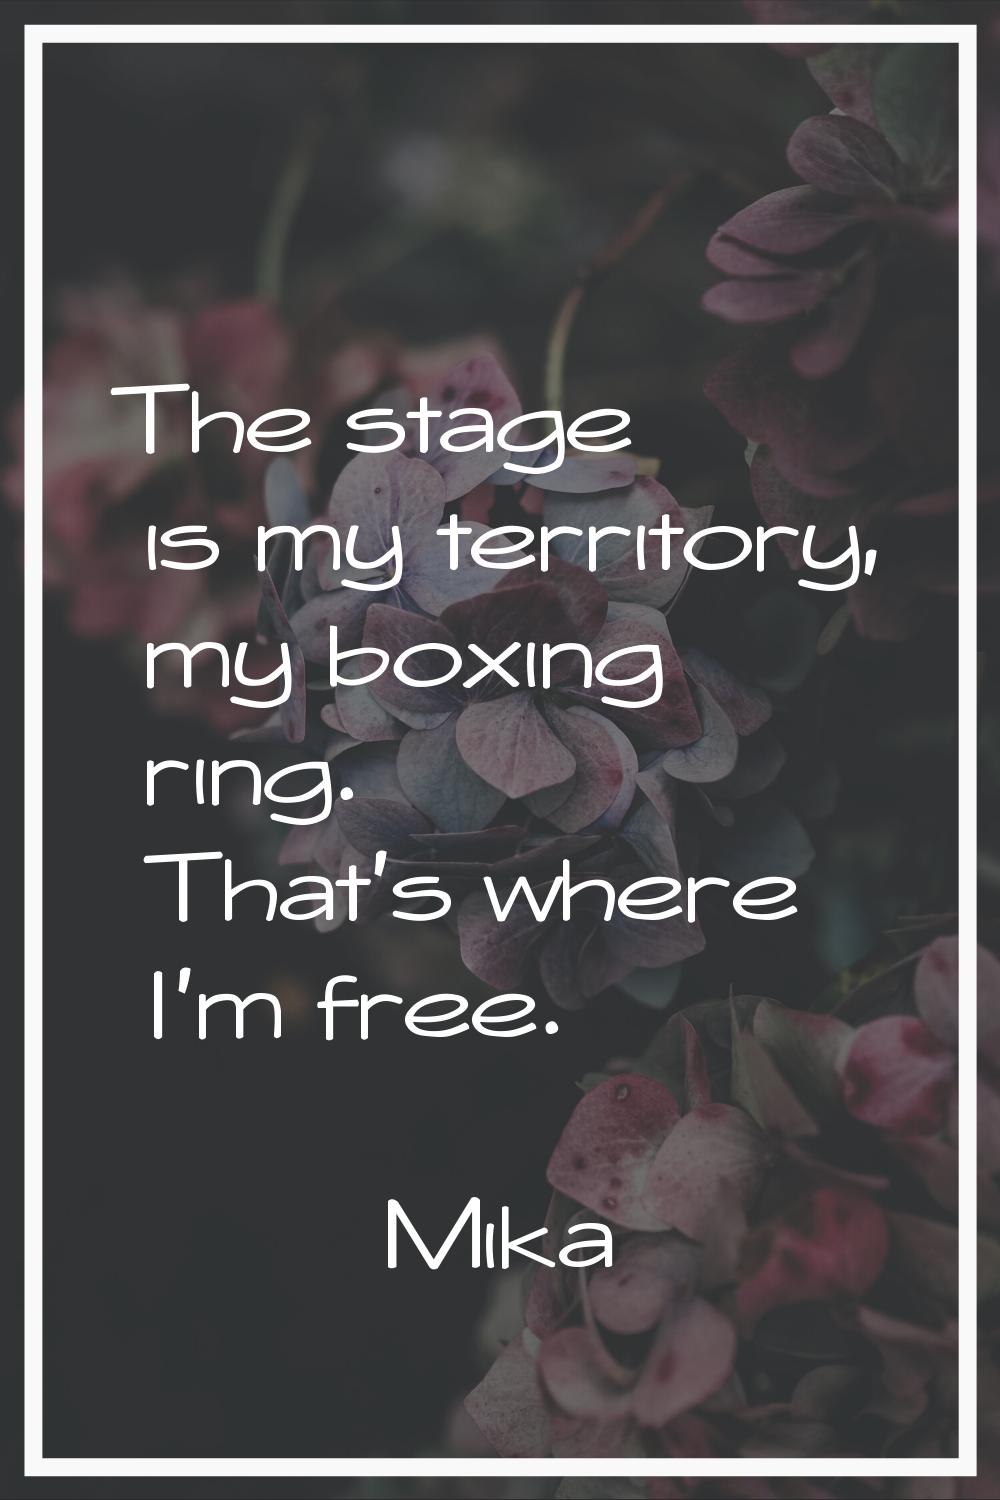 The stage is my territory, my boxing ring. That's where I'm free.